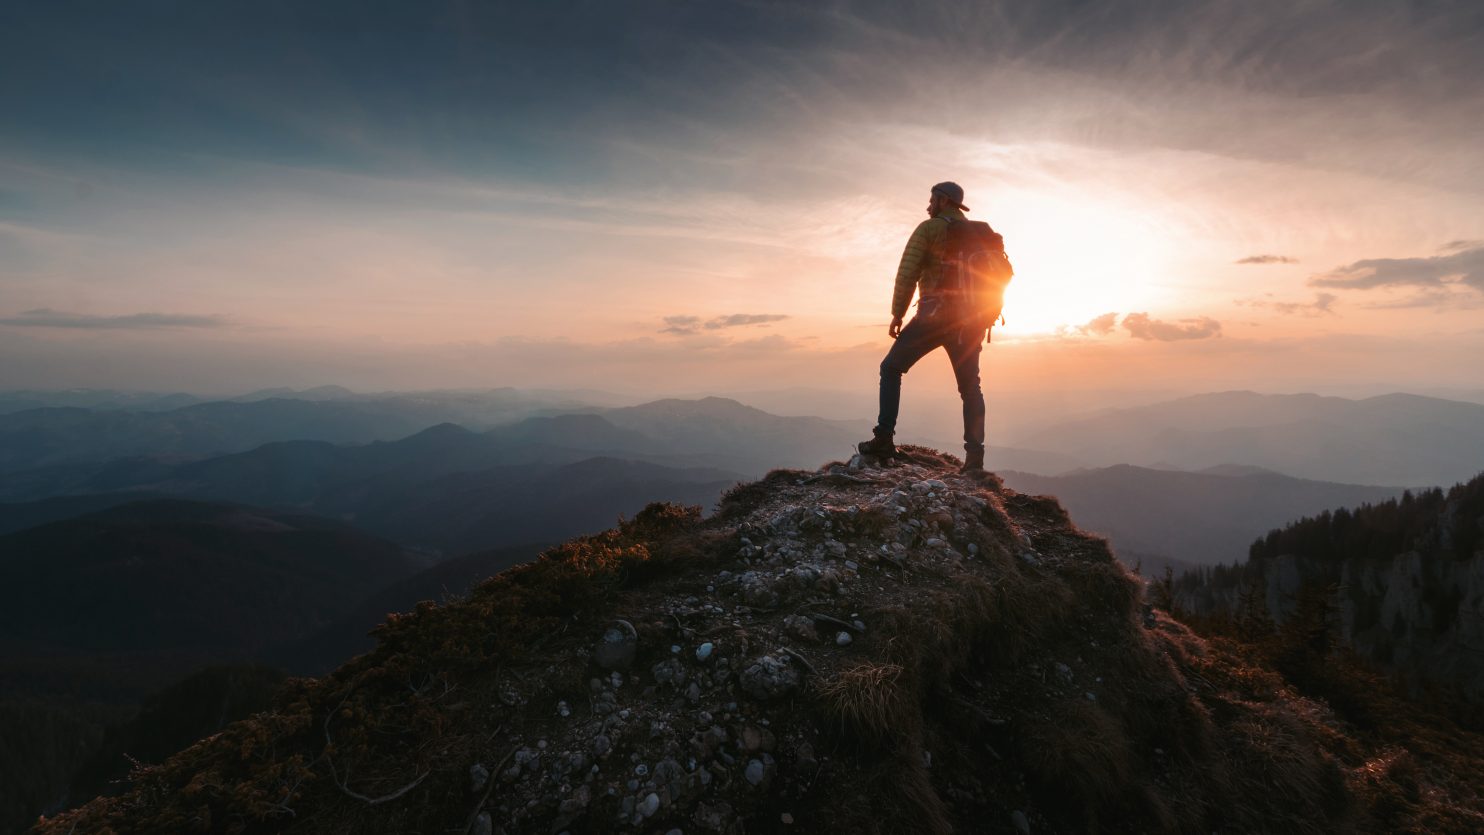 Man at the top of the mountain representing self-improvement and emotional wellbeing Man on top of mountain at sunrise representing self-improvement and emotional well-being.